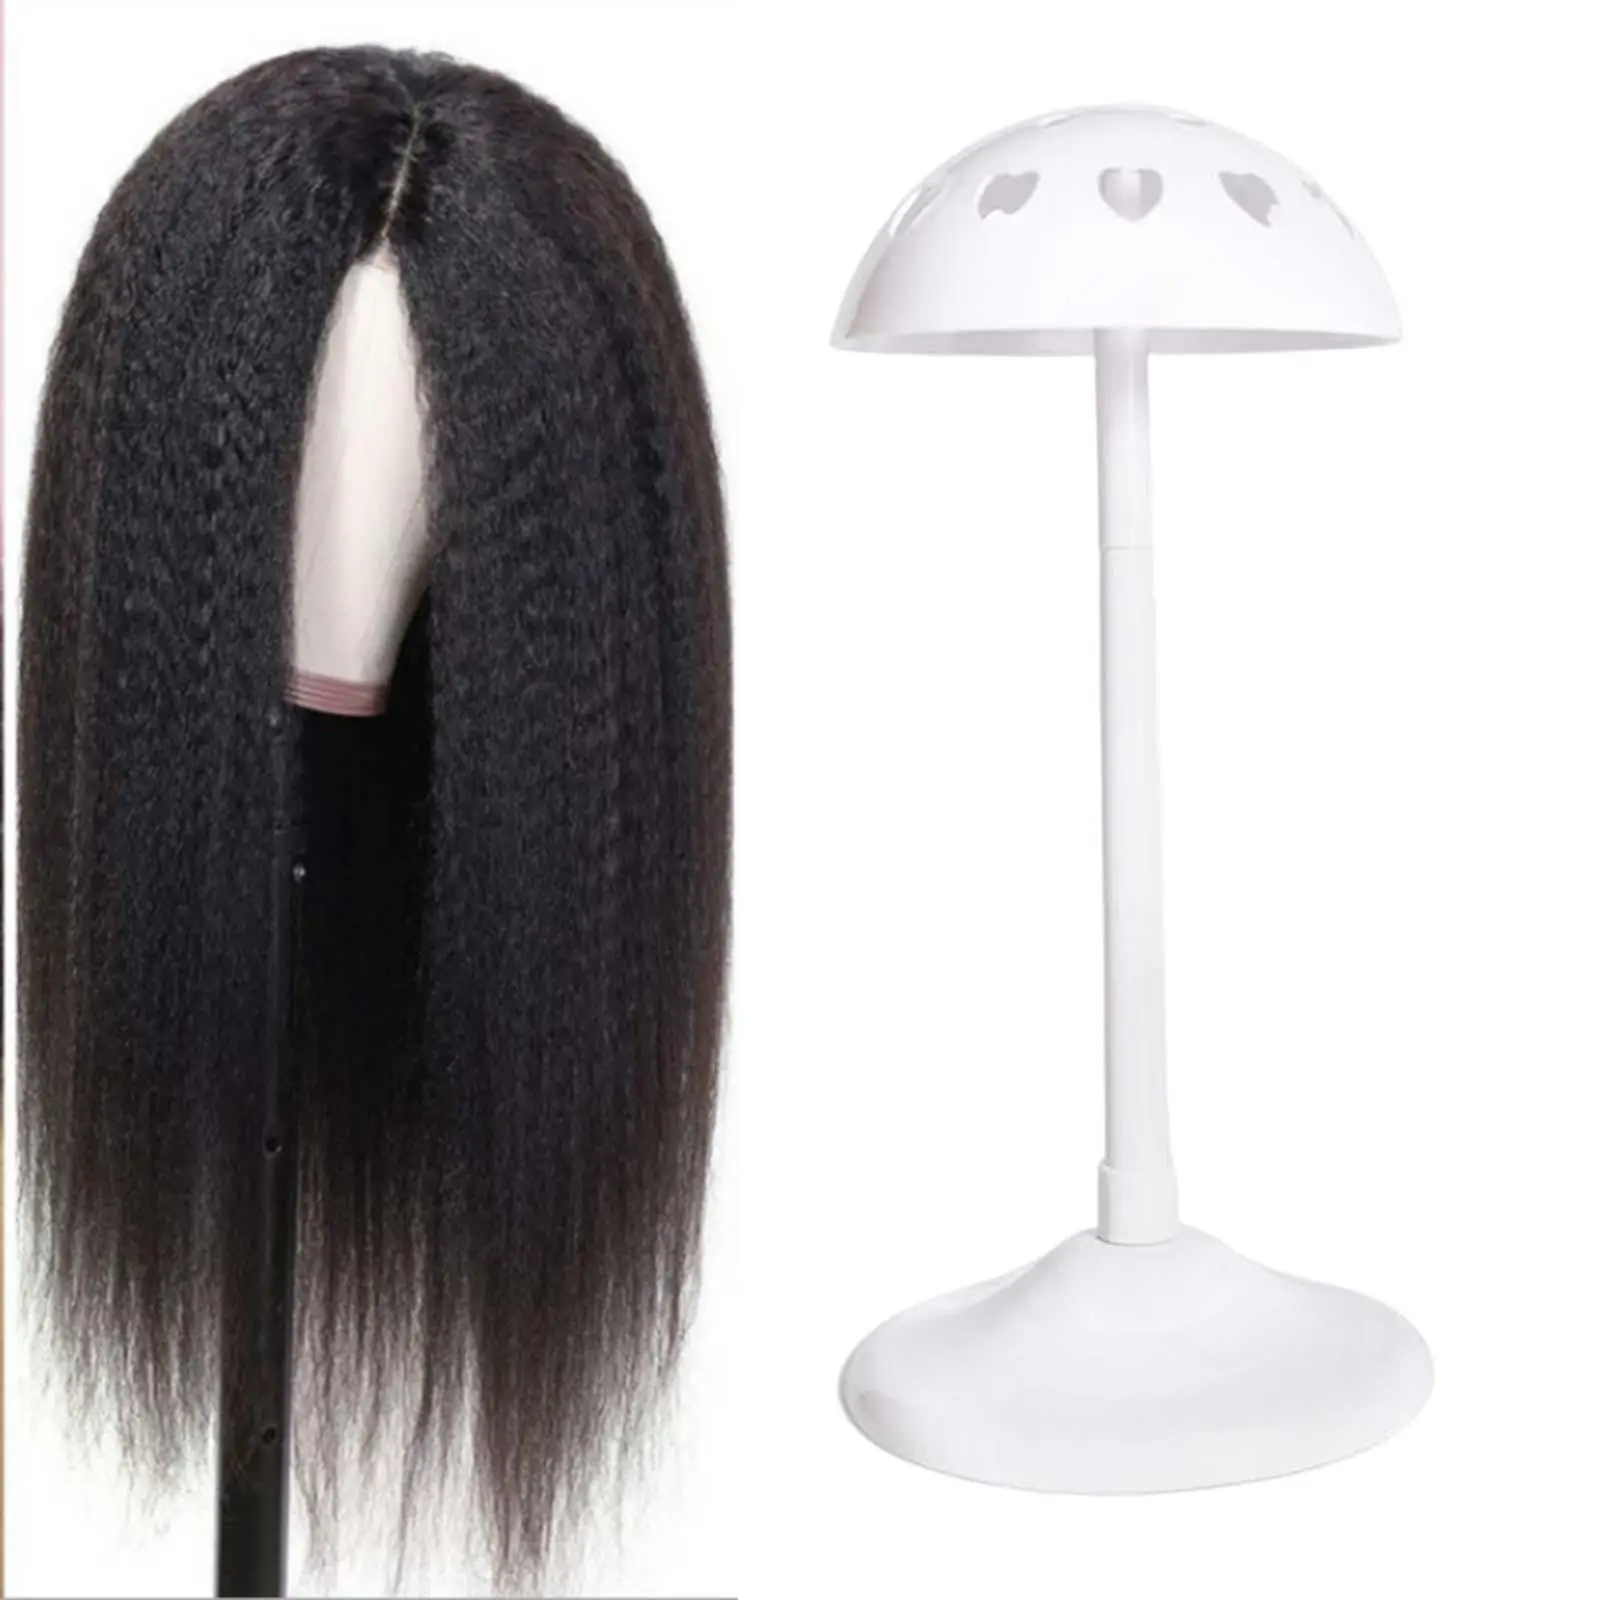 Wig Head Stand Holder Adjustable Rod for Multiple Wig Drying Styling Stylish Appearance